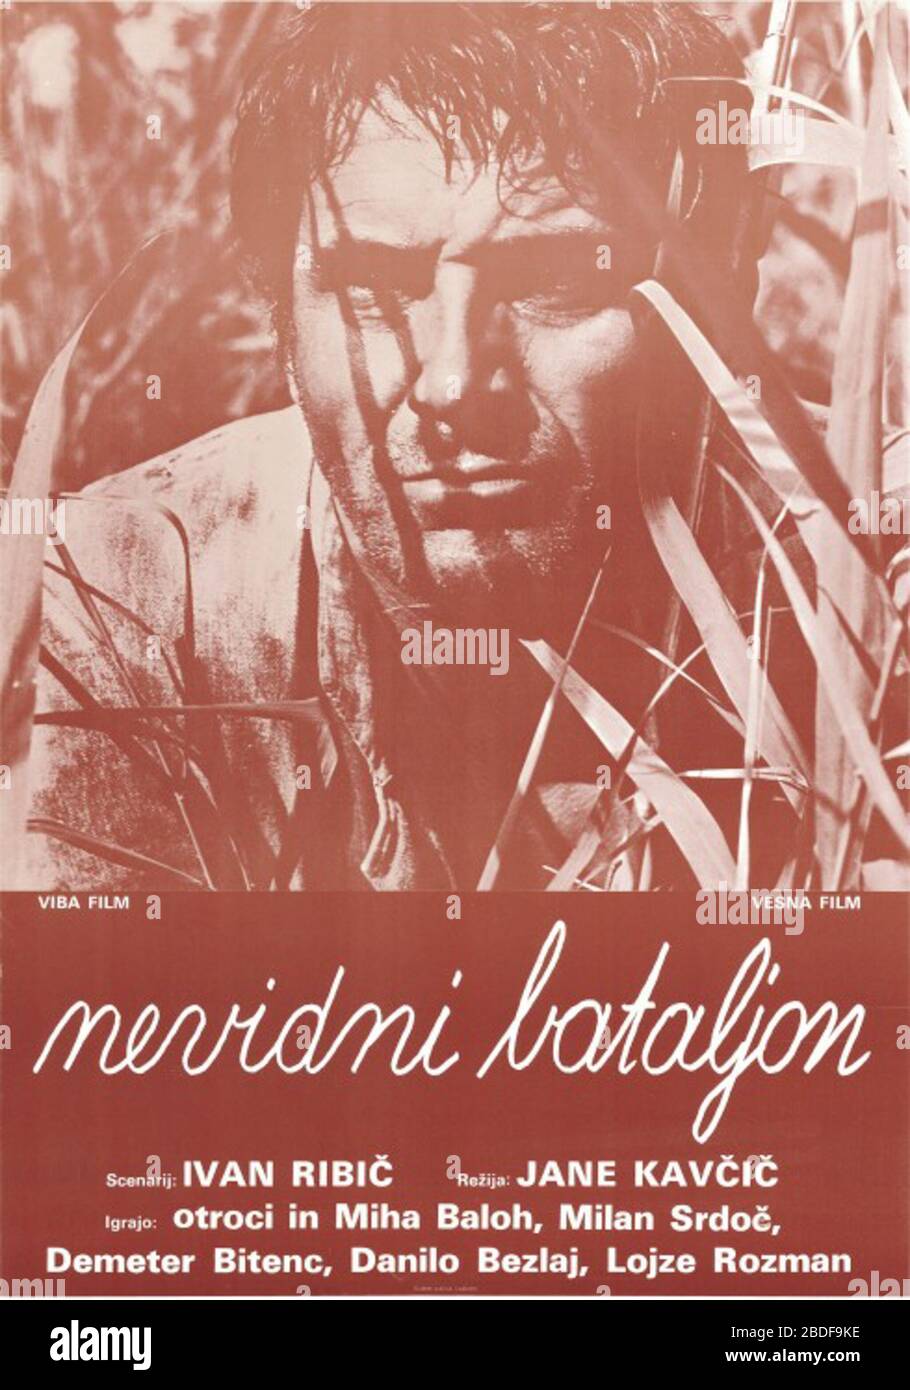 'Slovenščina: Plakat za film Nevidni bataljon.; 1967; This image is available from the Digital Library of Slovenia under the reference number SUW0F0LY  This tag does not indicate the copyright status of the attached work. A normal copyright tag is still required. See Commons:Licensing for more information. Deutsch | English | español | italiano | македонски | polski | português | slovenščina | +/−; Unknown author; ' Stock Photo